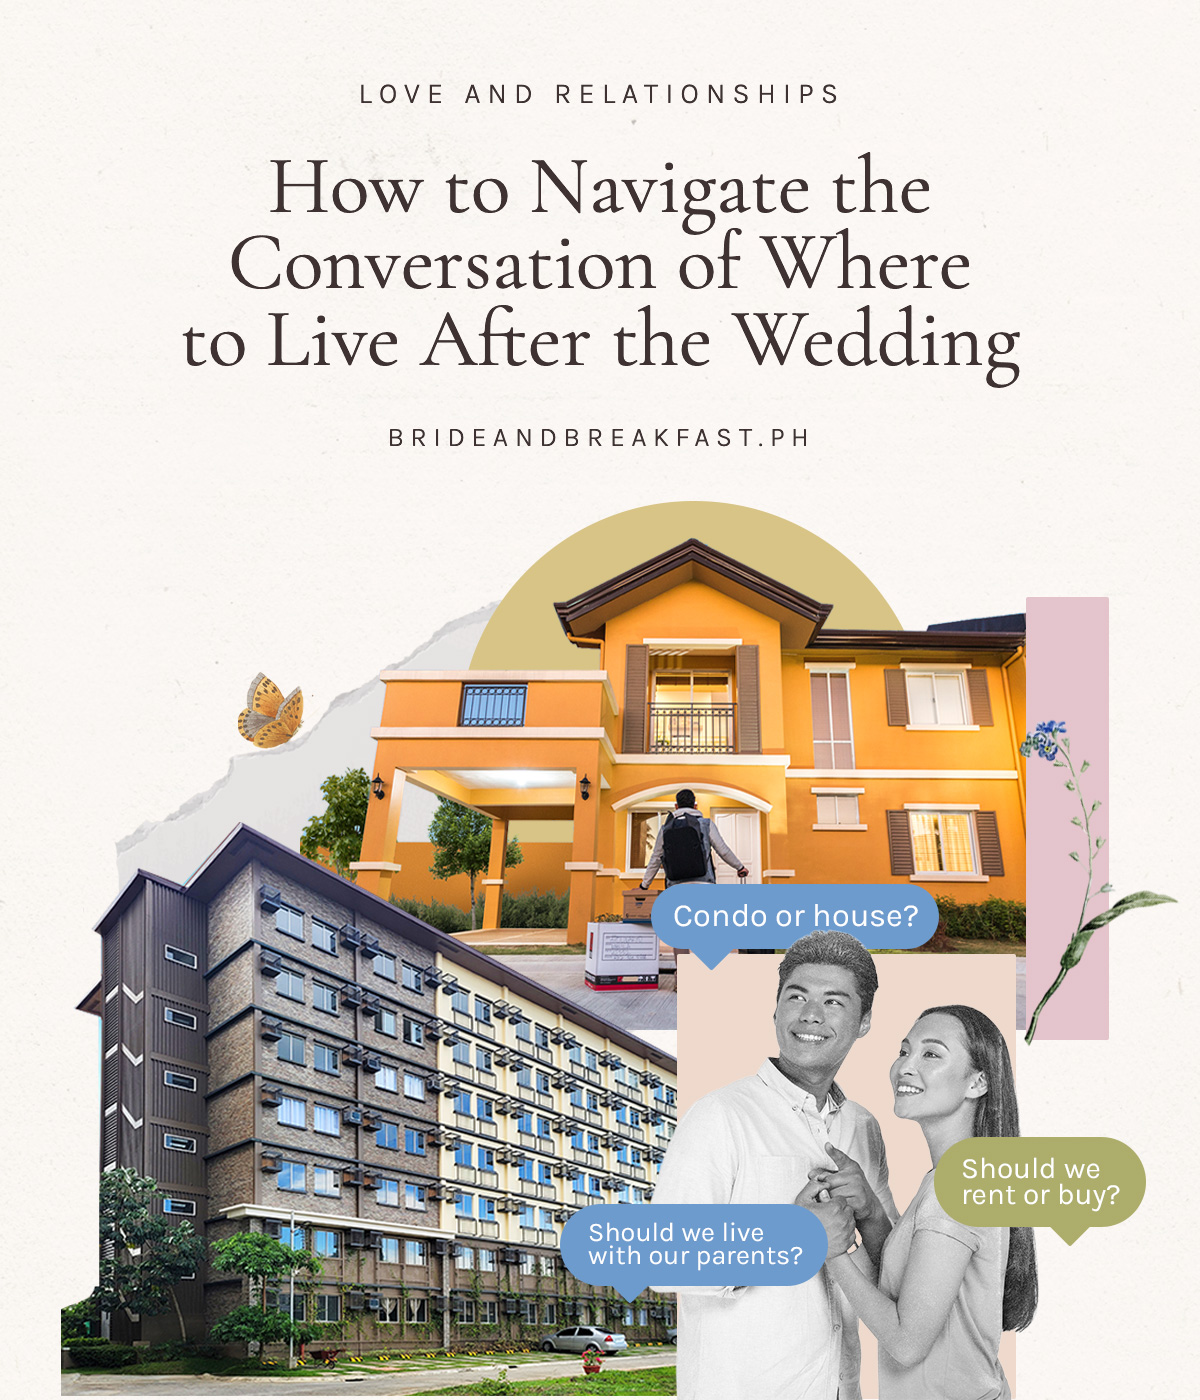 How to Navigate the Conversation of Where to Live After the Wedding